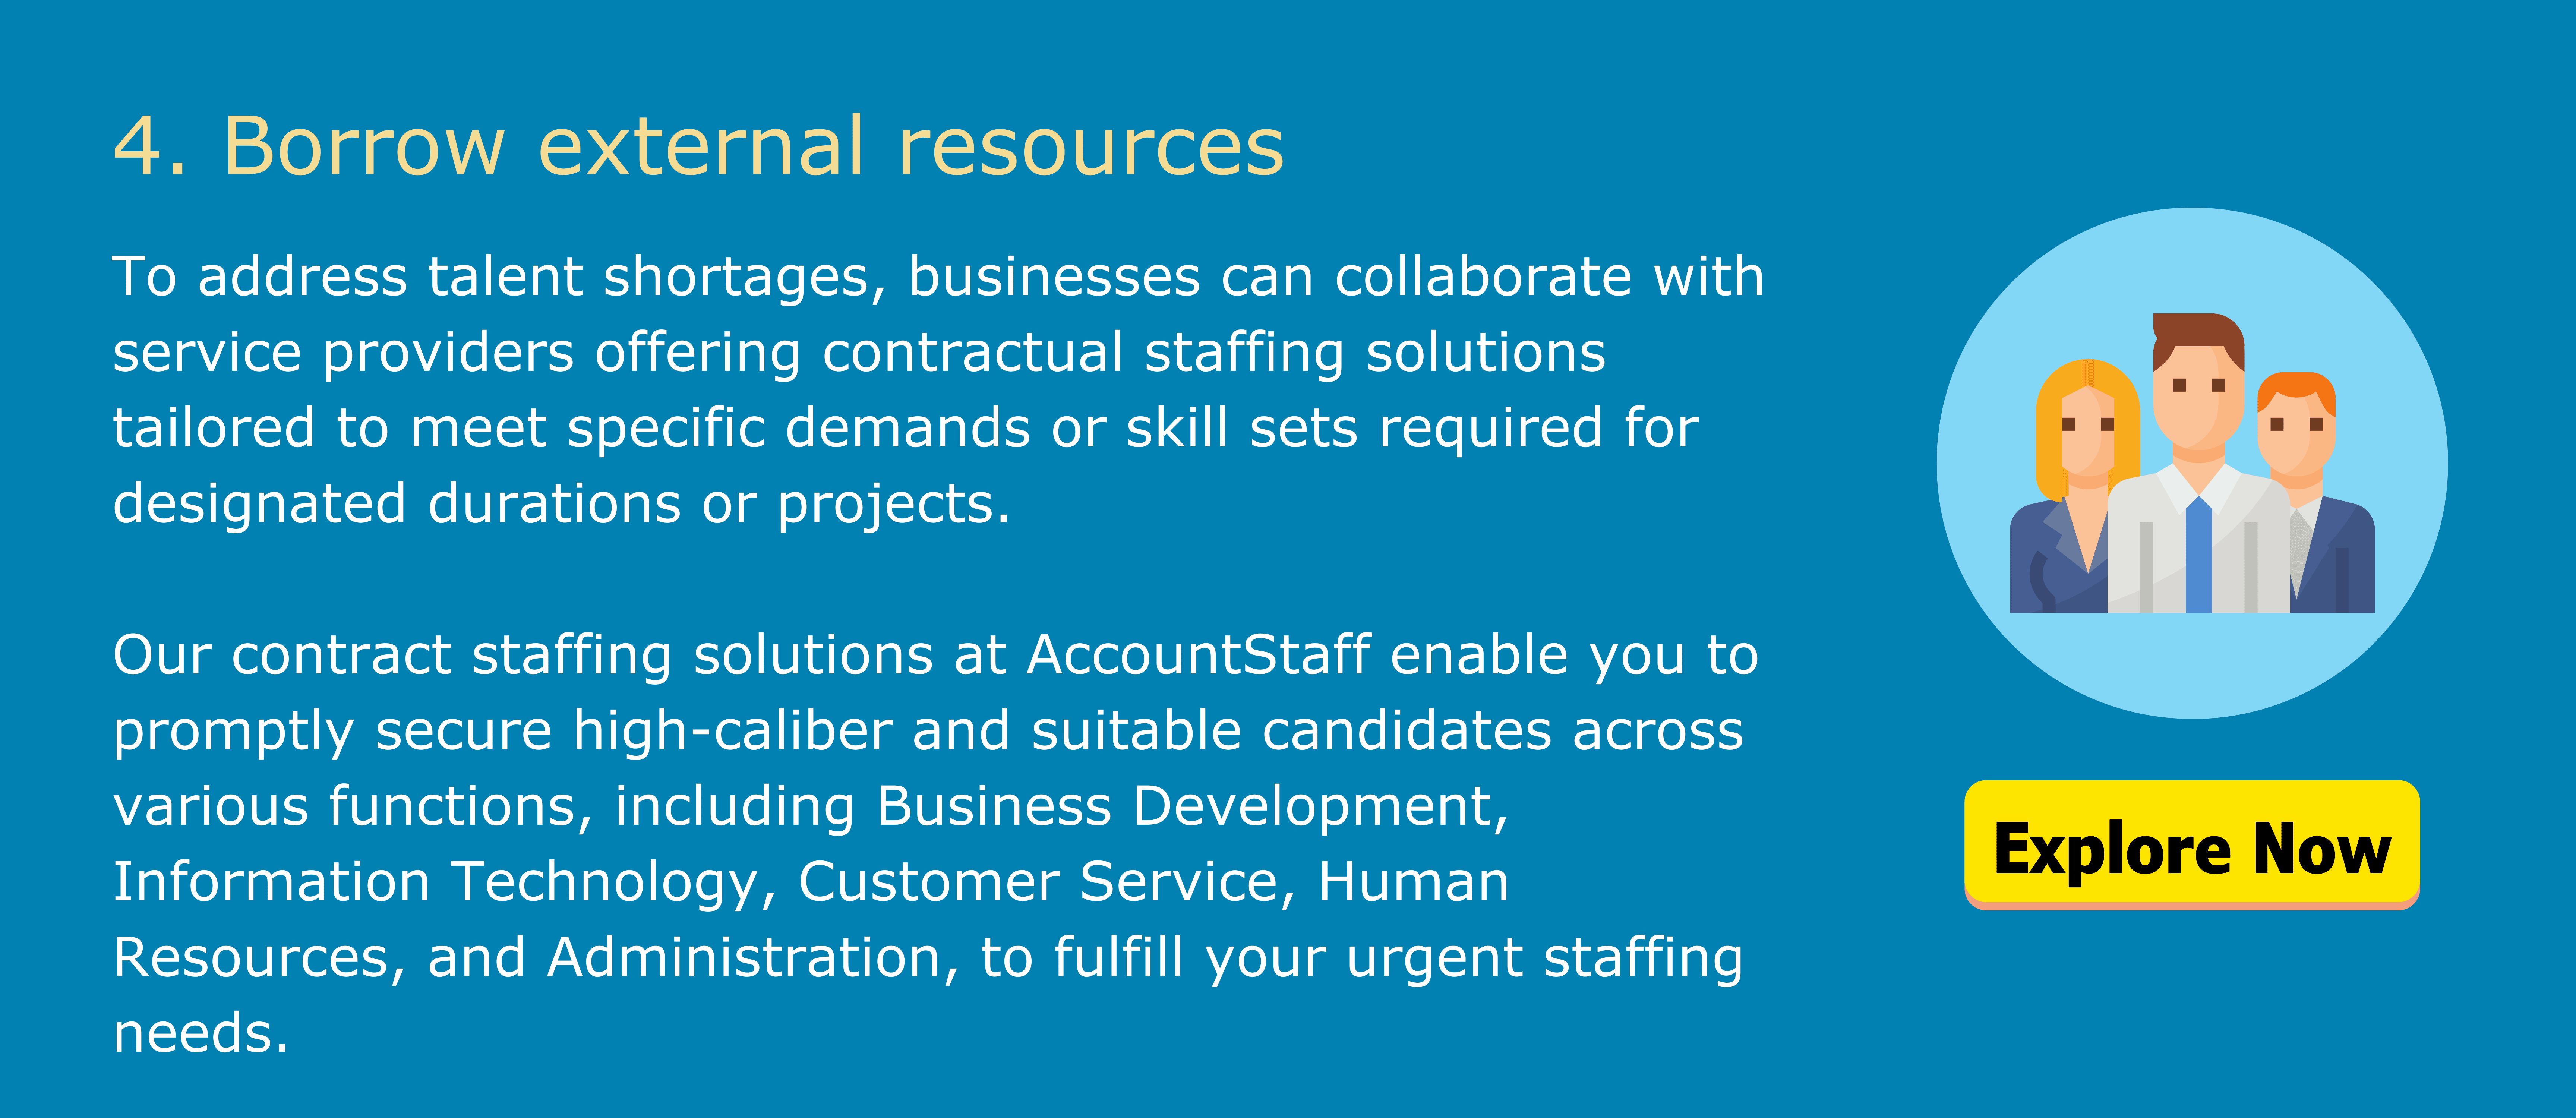 4.	Borrow external resources to “Assign Temporary Talent”